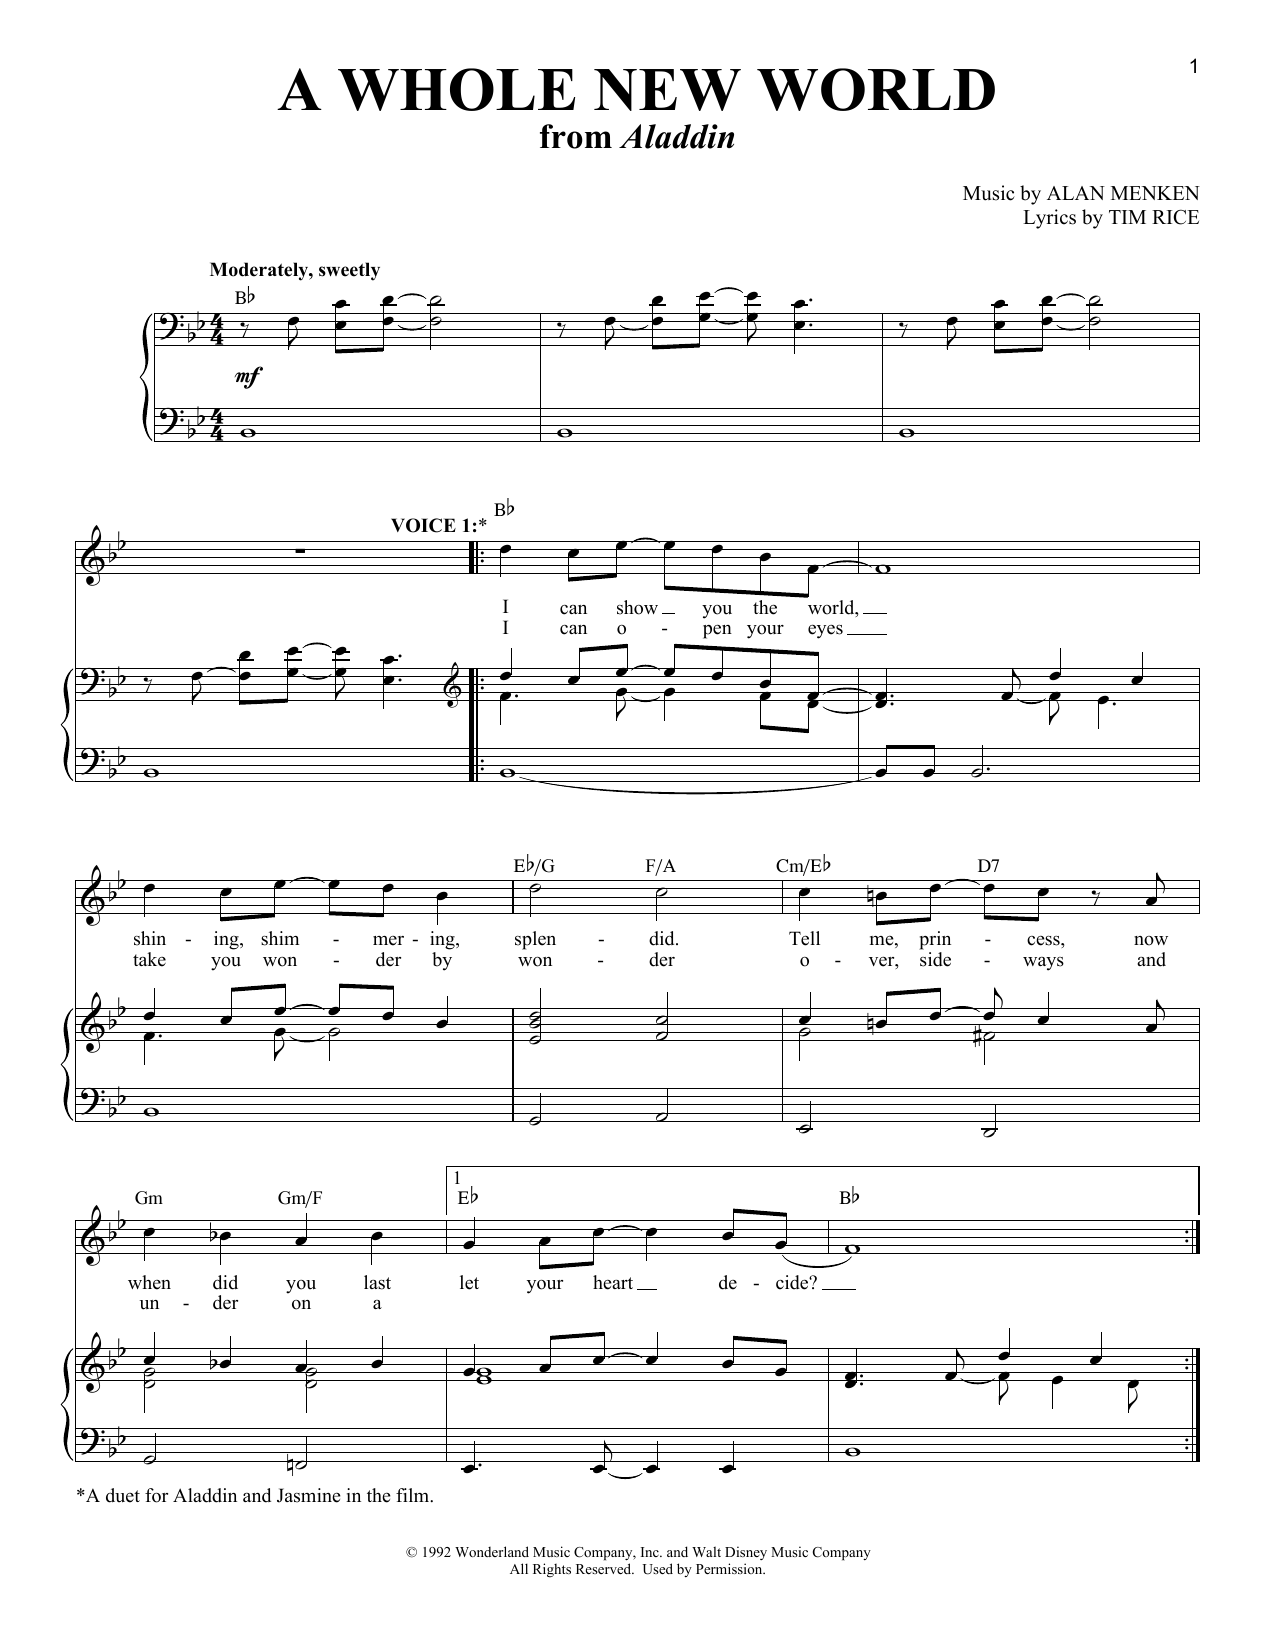 Peabo Bryson and Regina Belle A Whole New World (Aladdin's Theme) sheet music notes and chords. Download Printable PDF.